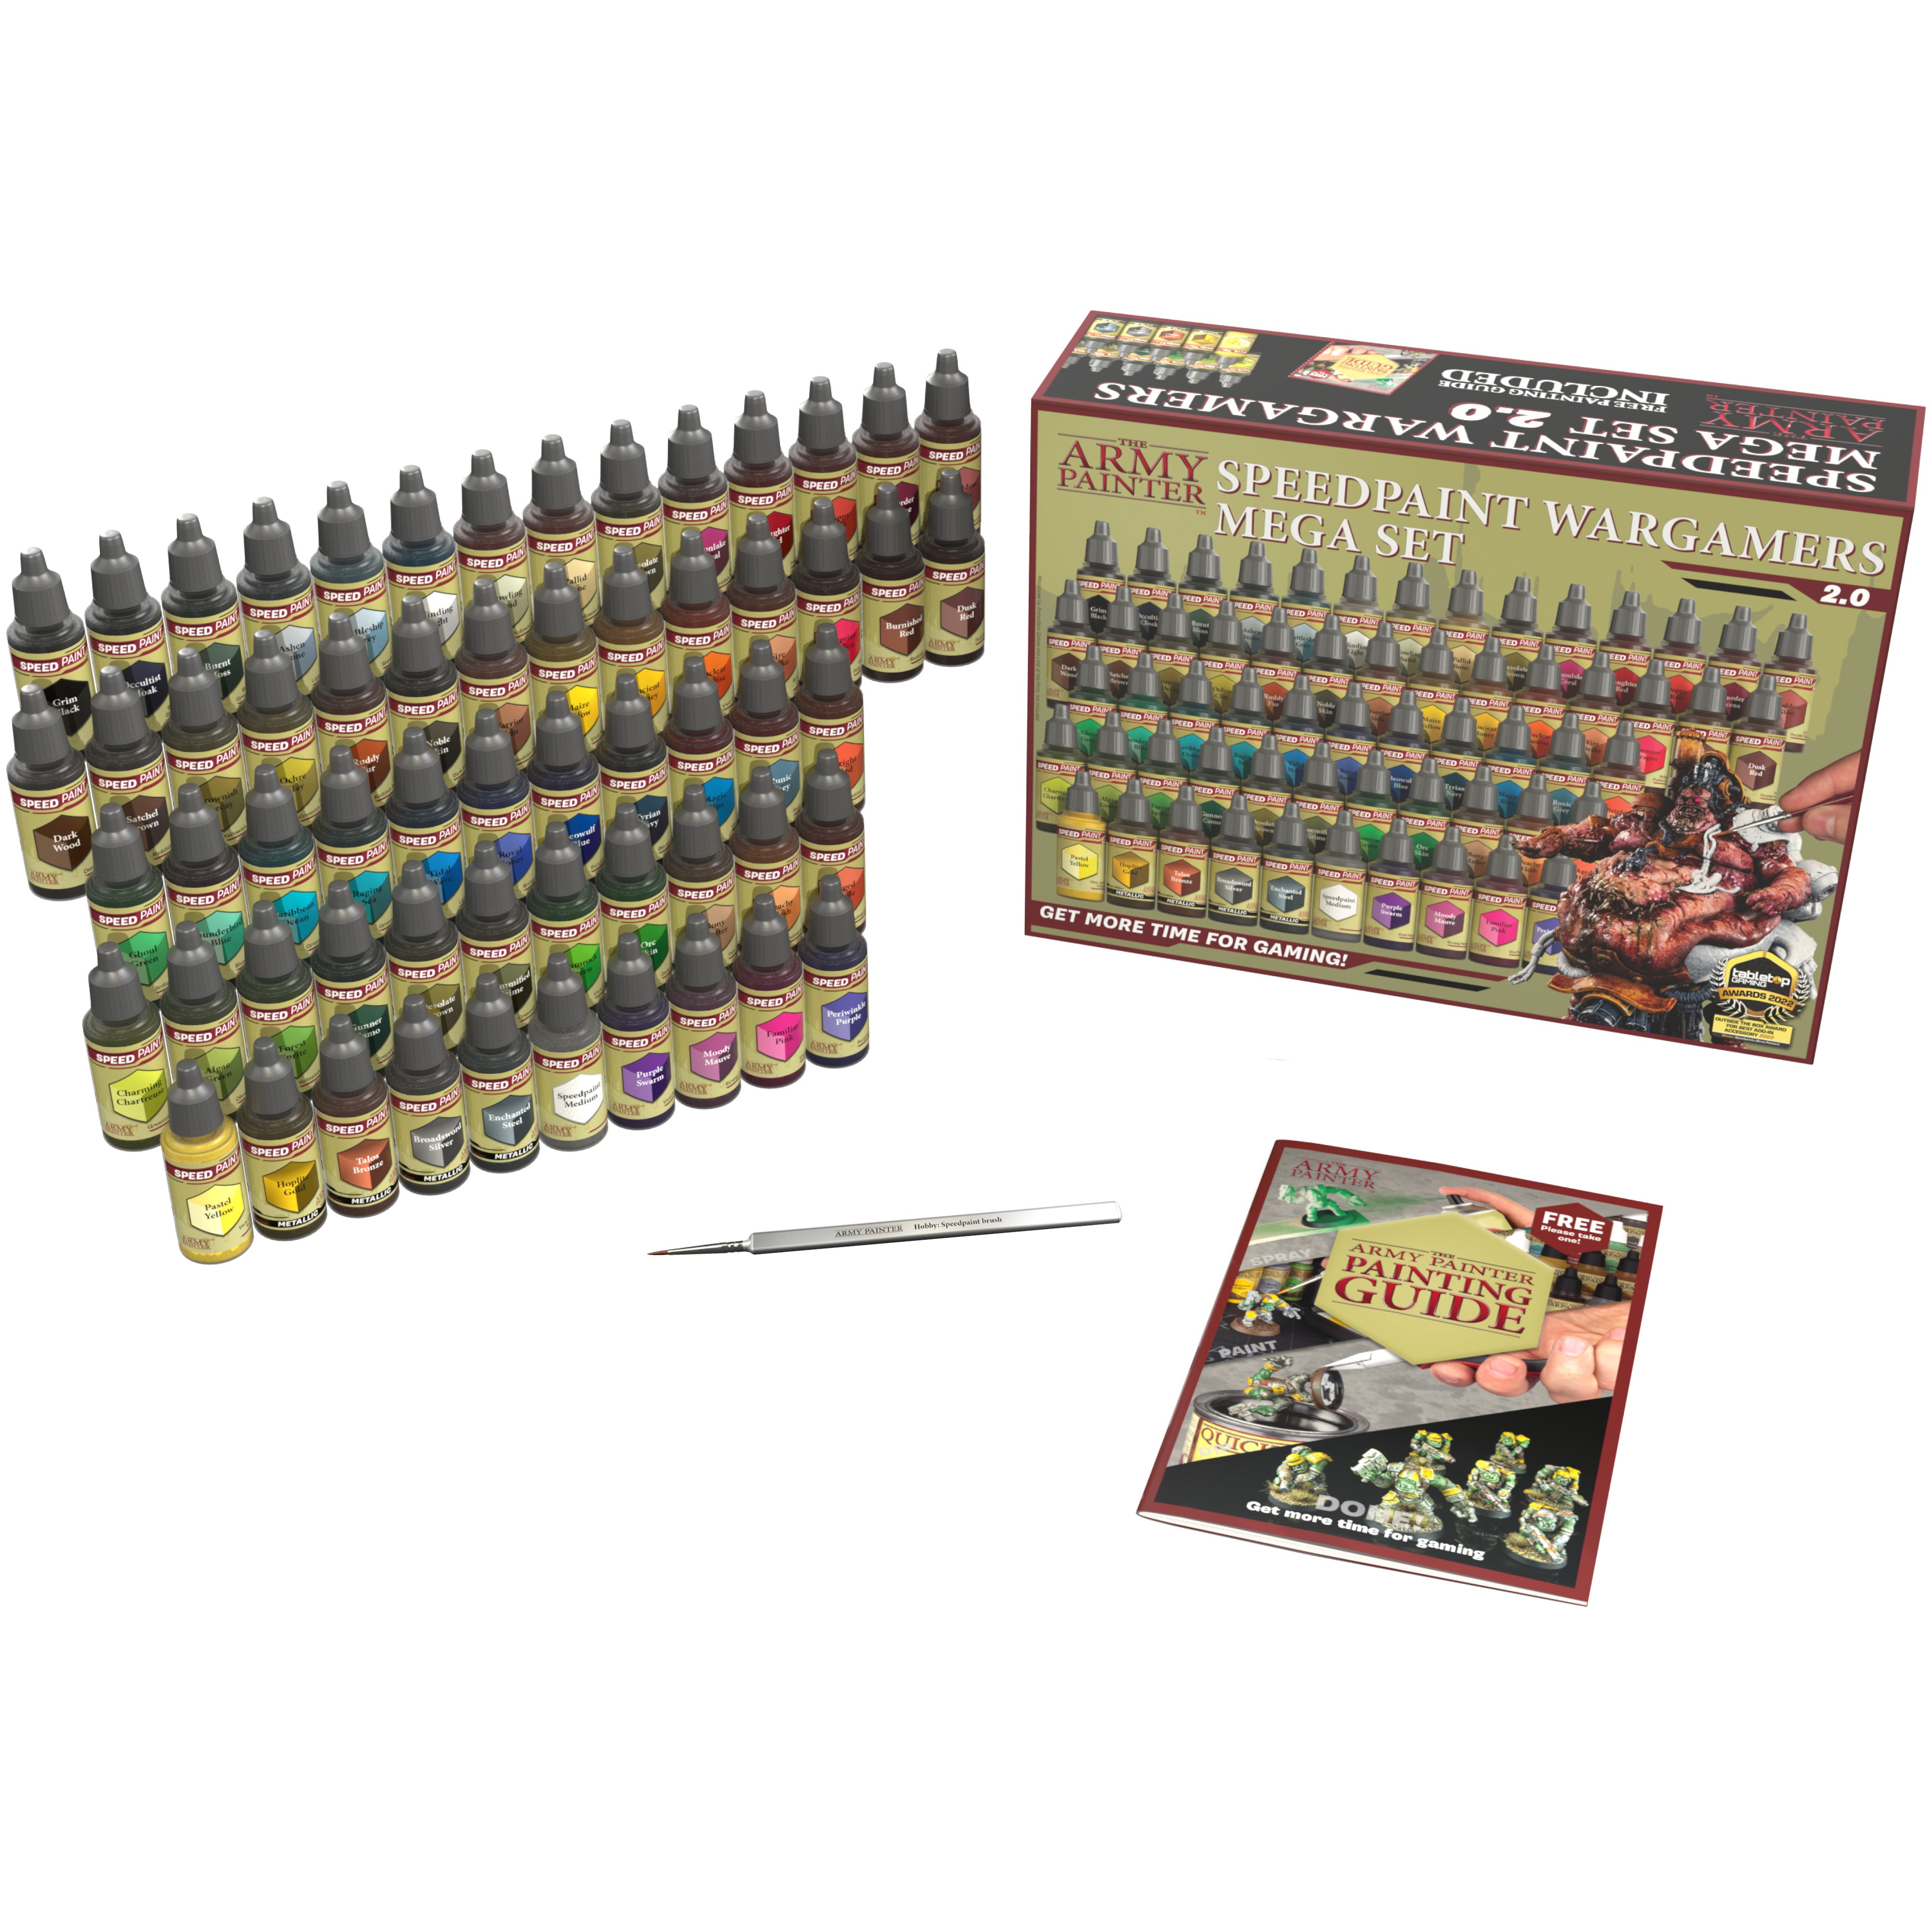 ARMY PAINTER'S MEGA SET FOR SPEEDPAINT 2.0 IS HERE! the mega set conta